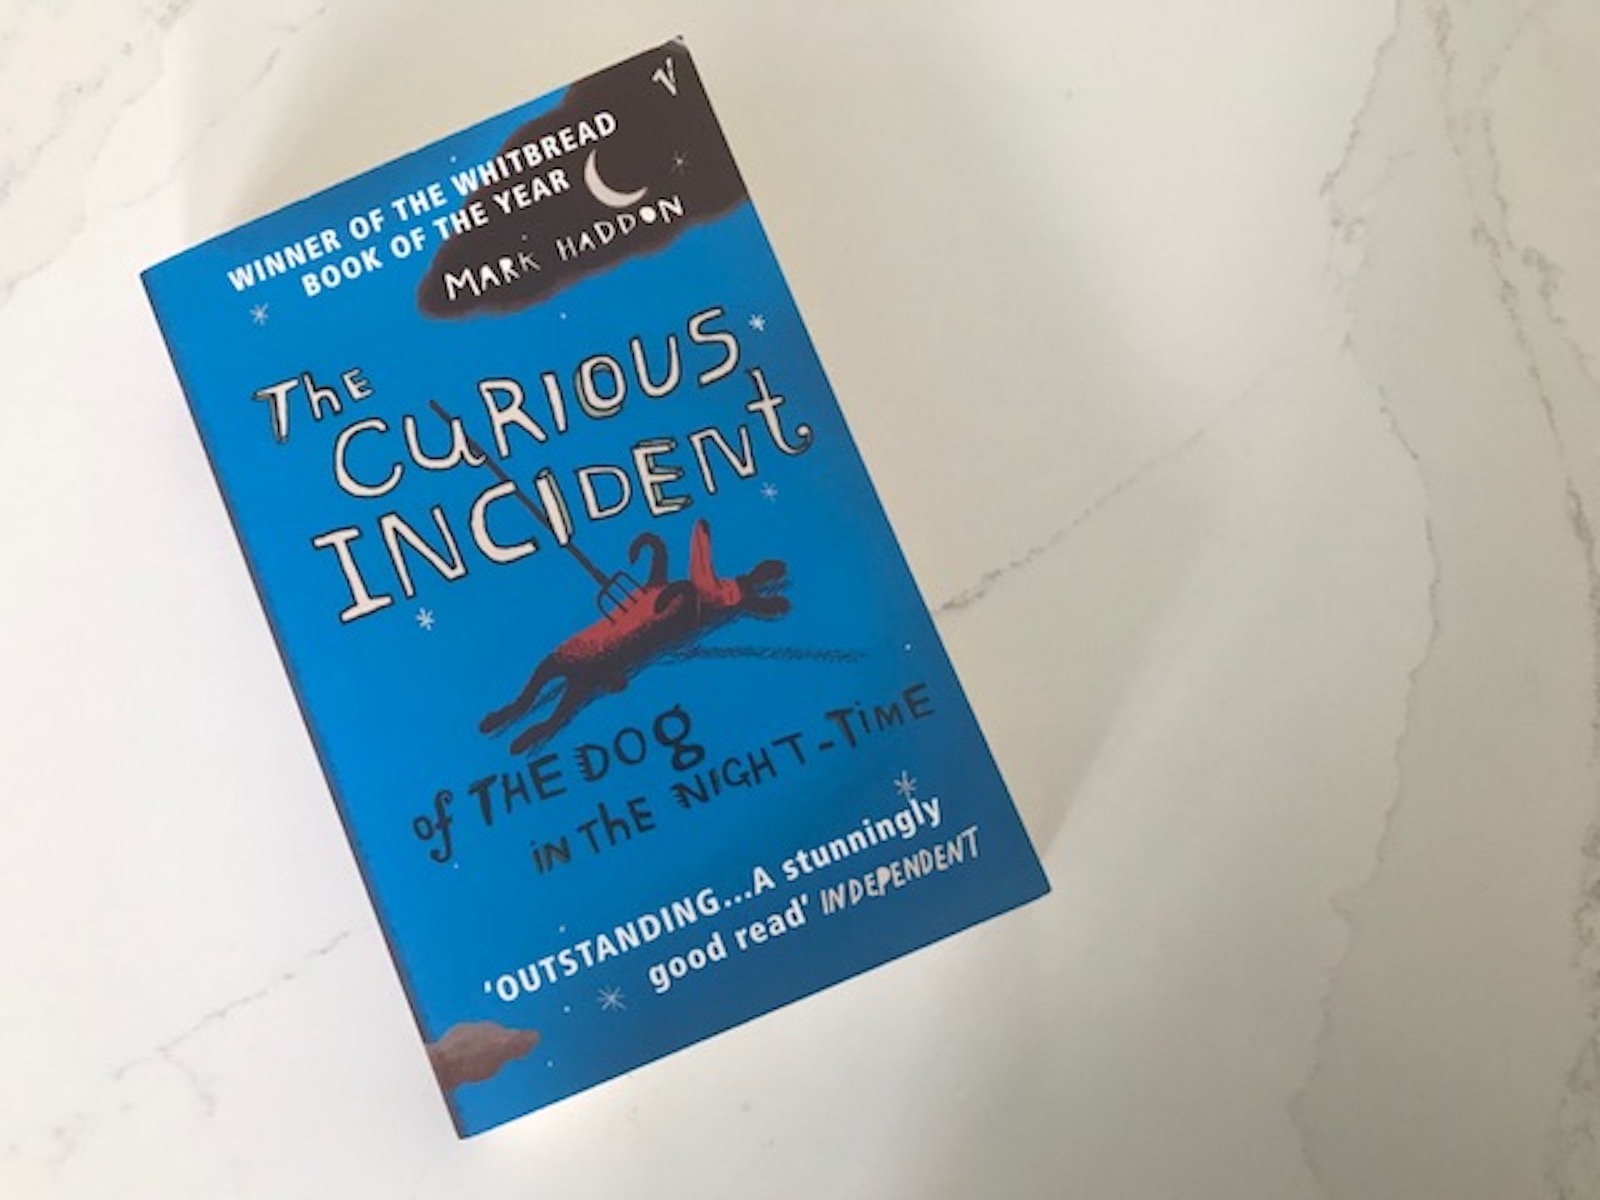 Ballymena Today Bookclub – Curious Incident of the Dog in the Night-time